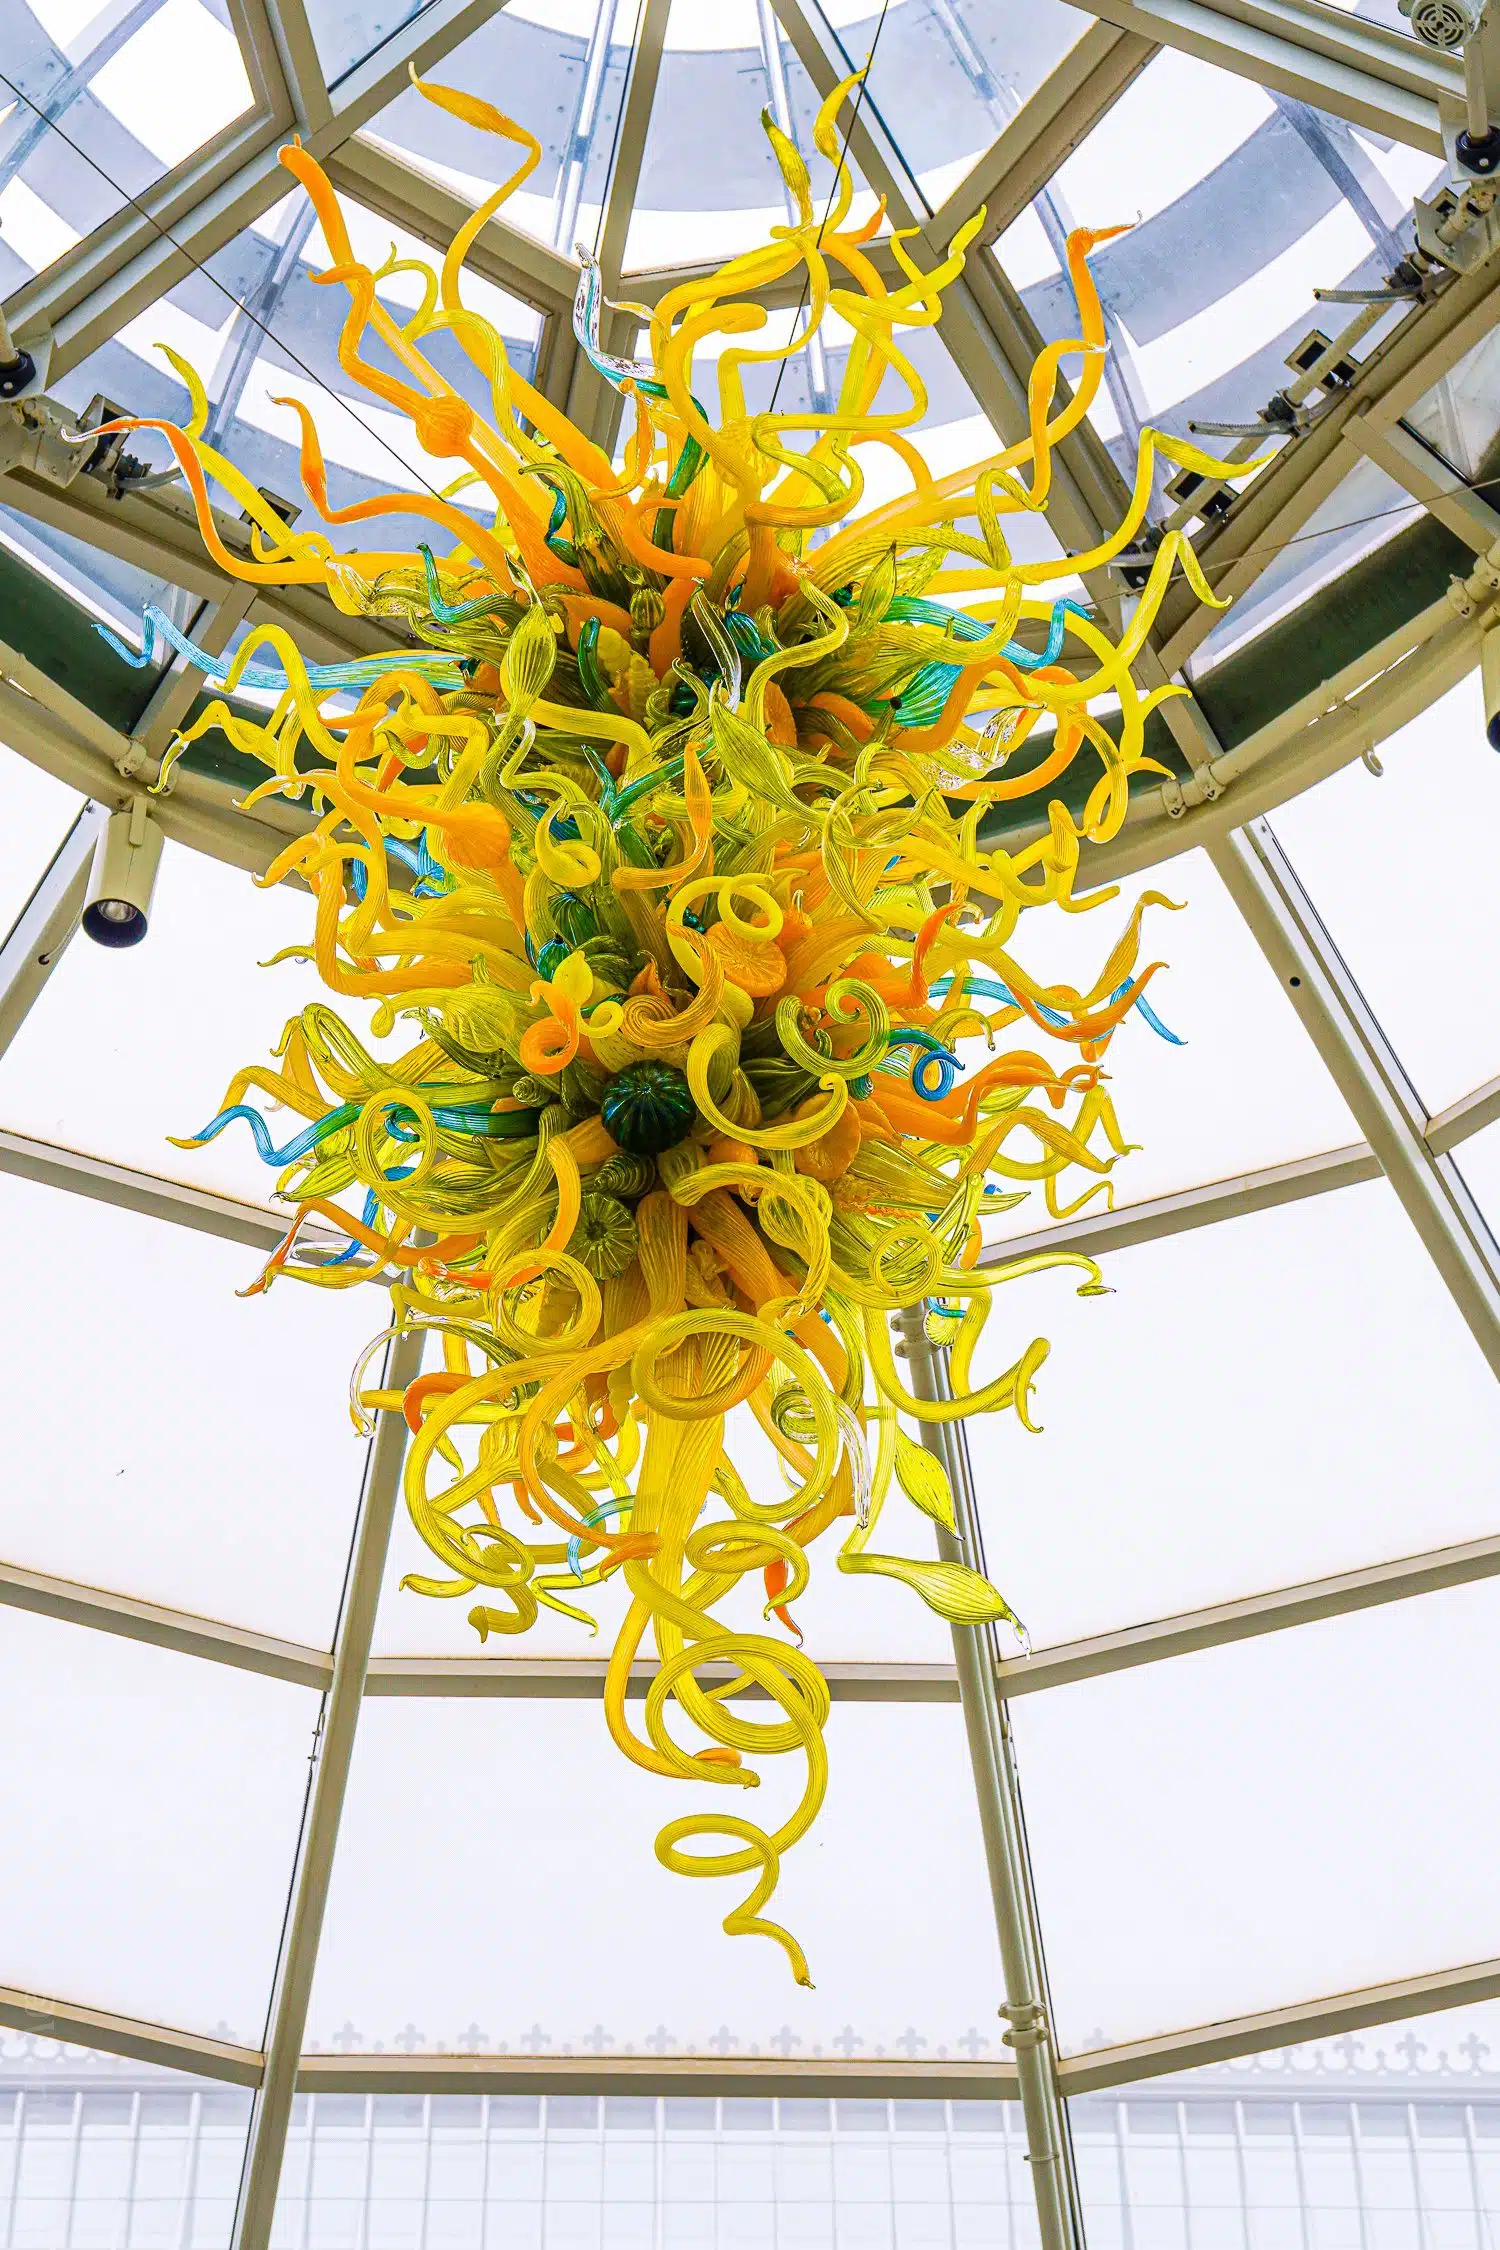 A Chihuly glass chandelier in the atrium.